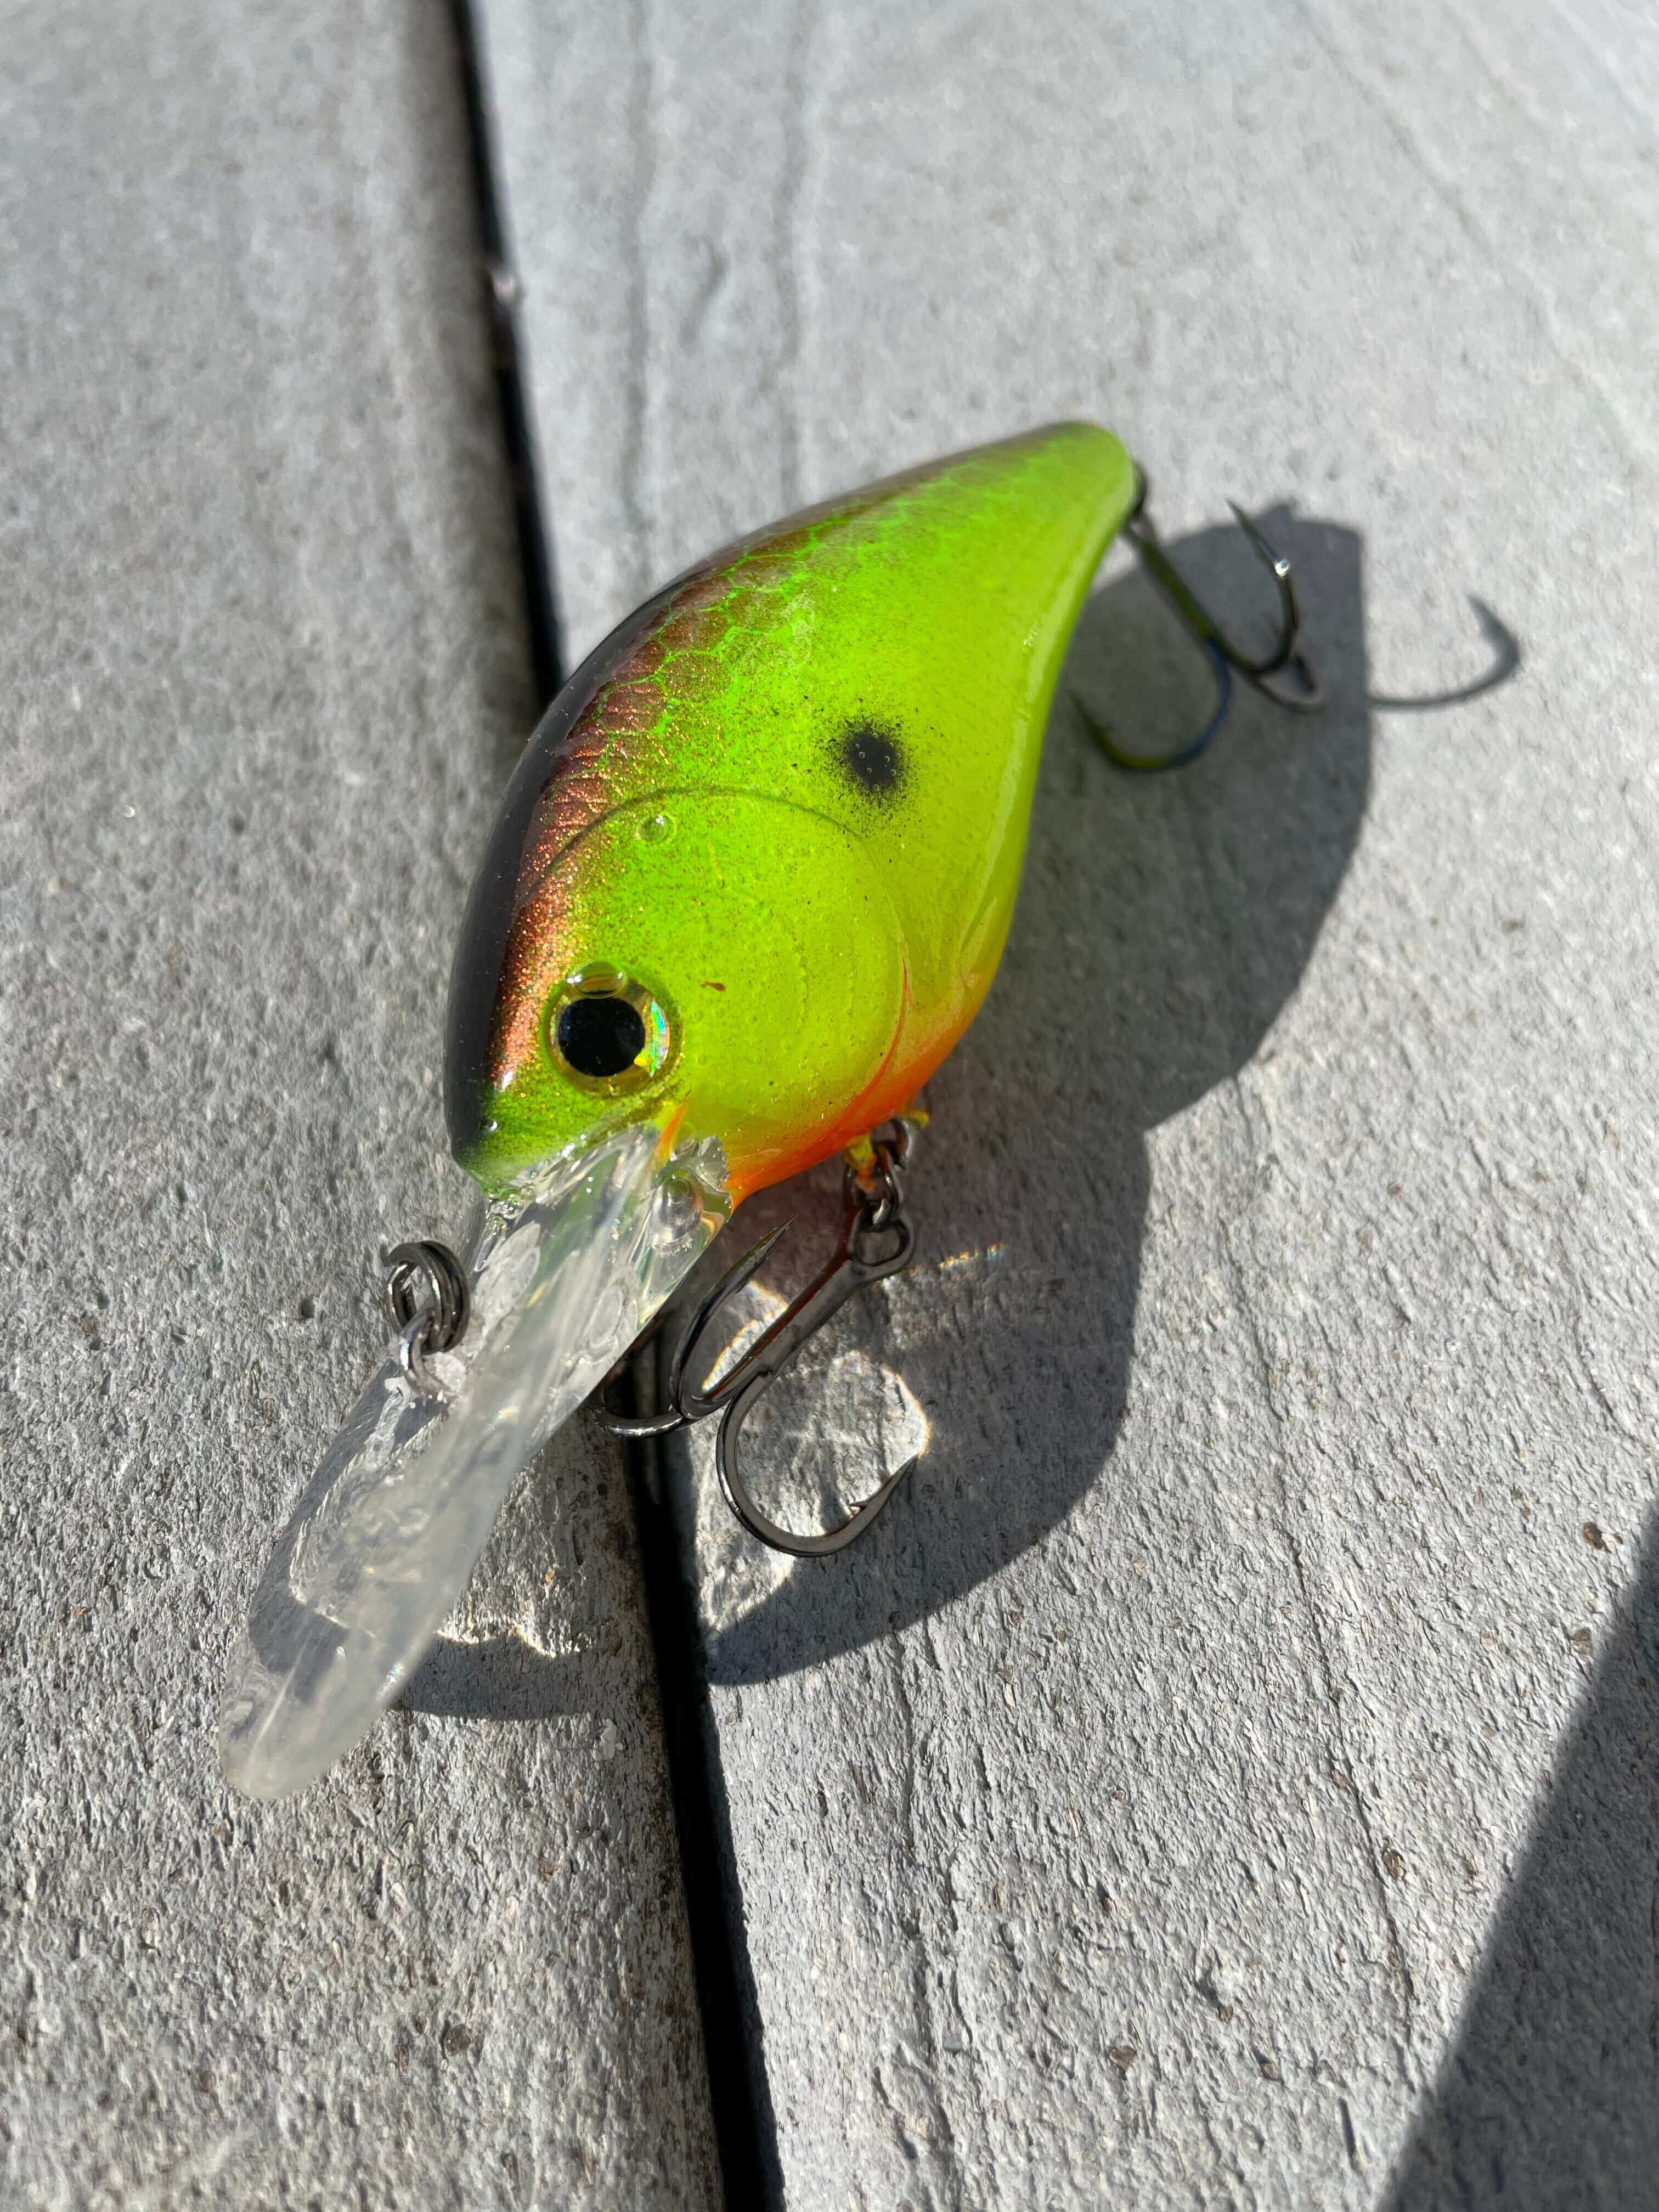 Target Species Acquired: Custom Fishing Lures